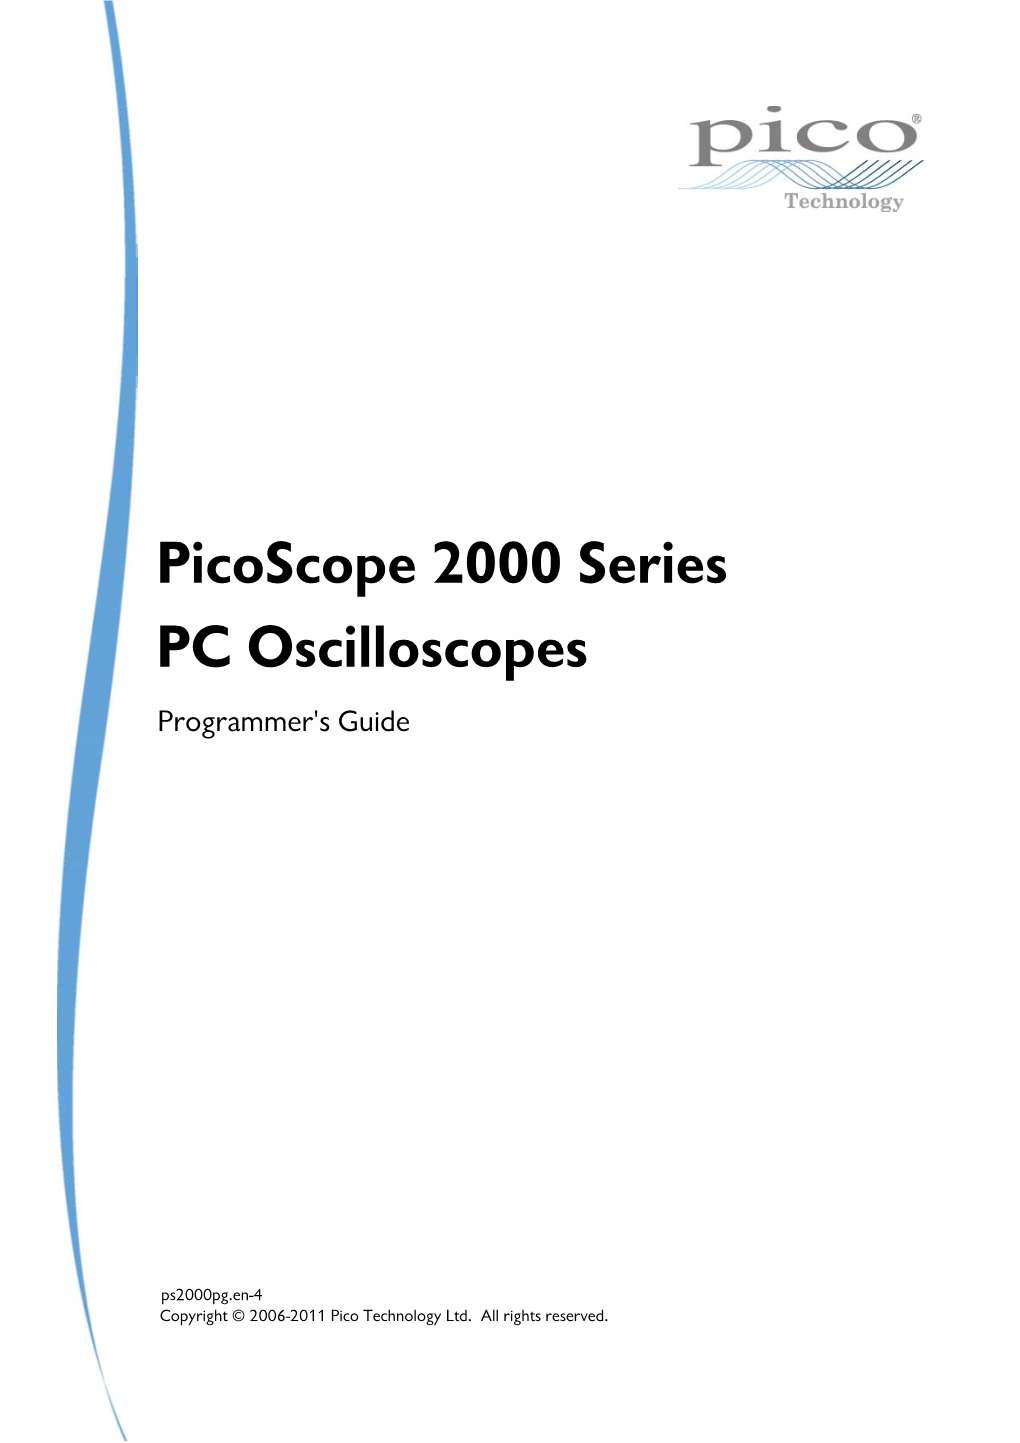 Picoscope 2000 Series Programmer's Guide I Contents